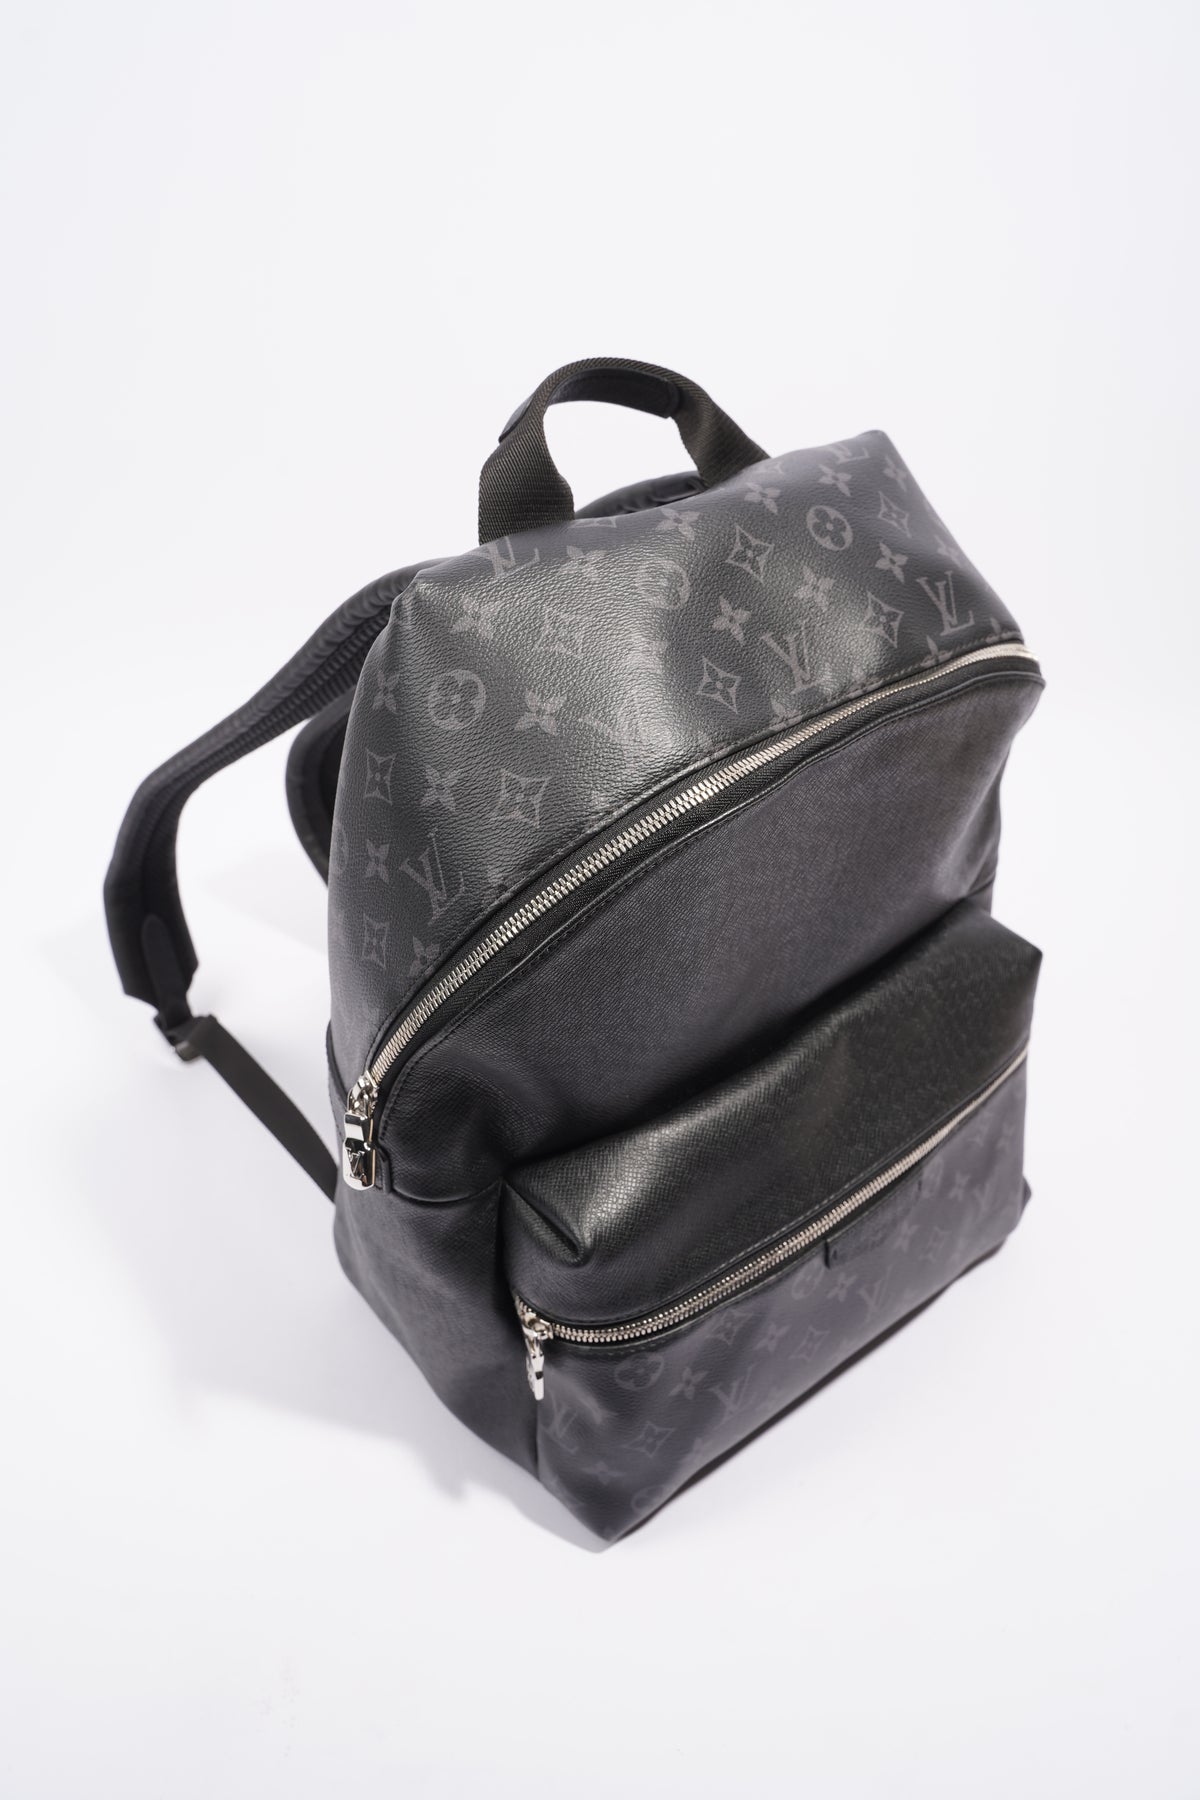 Louis Vuitton Discovery Backpack PM Eclipse autres Toiles Monogram